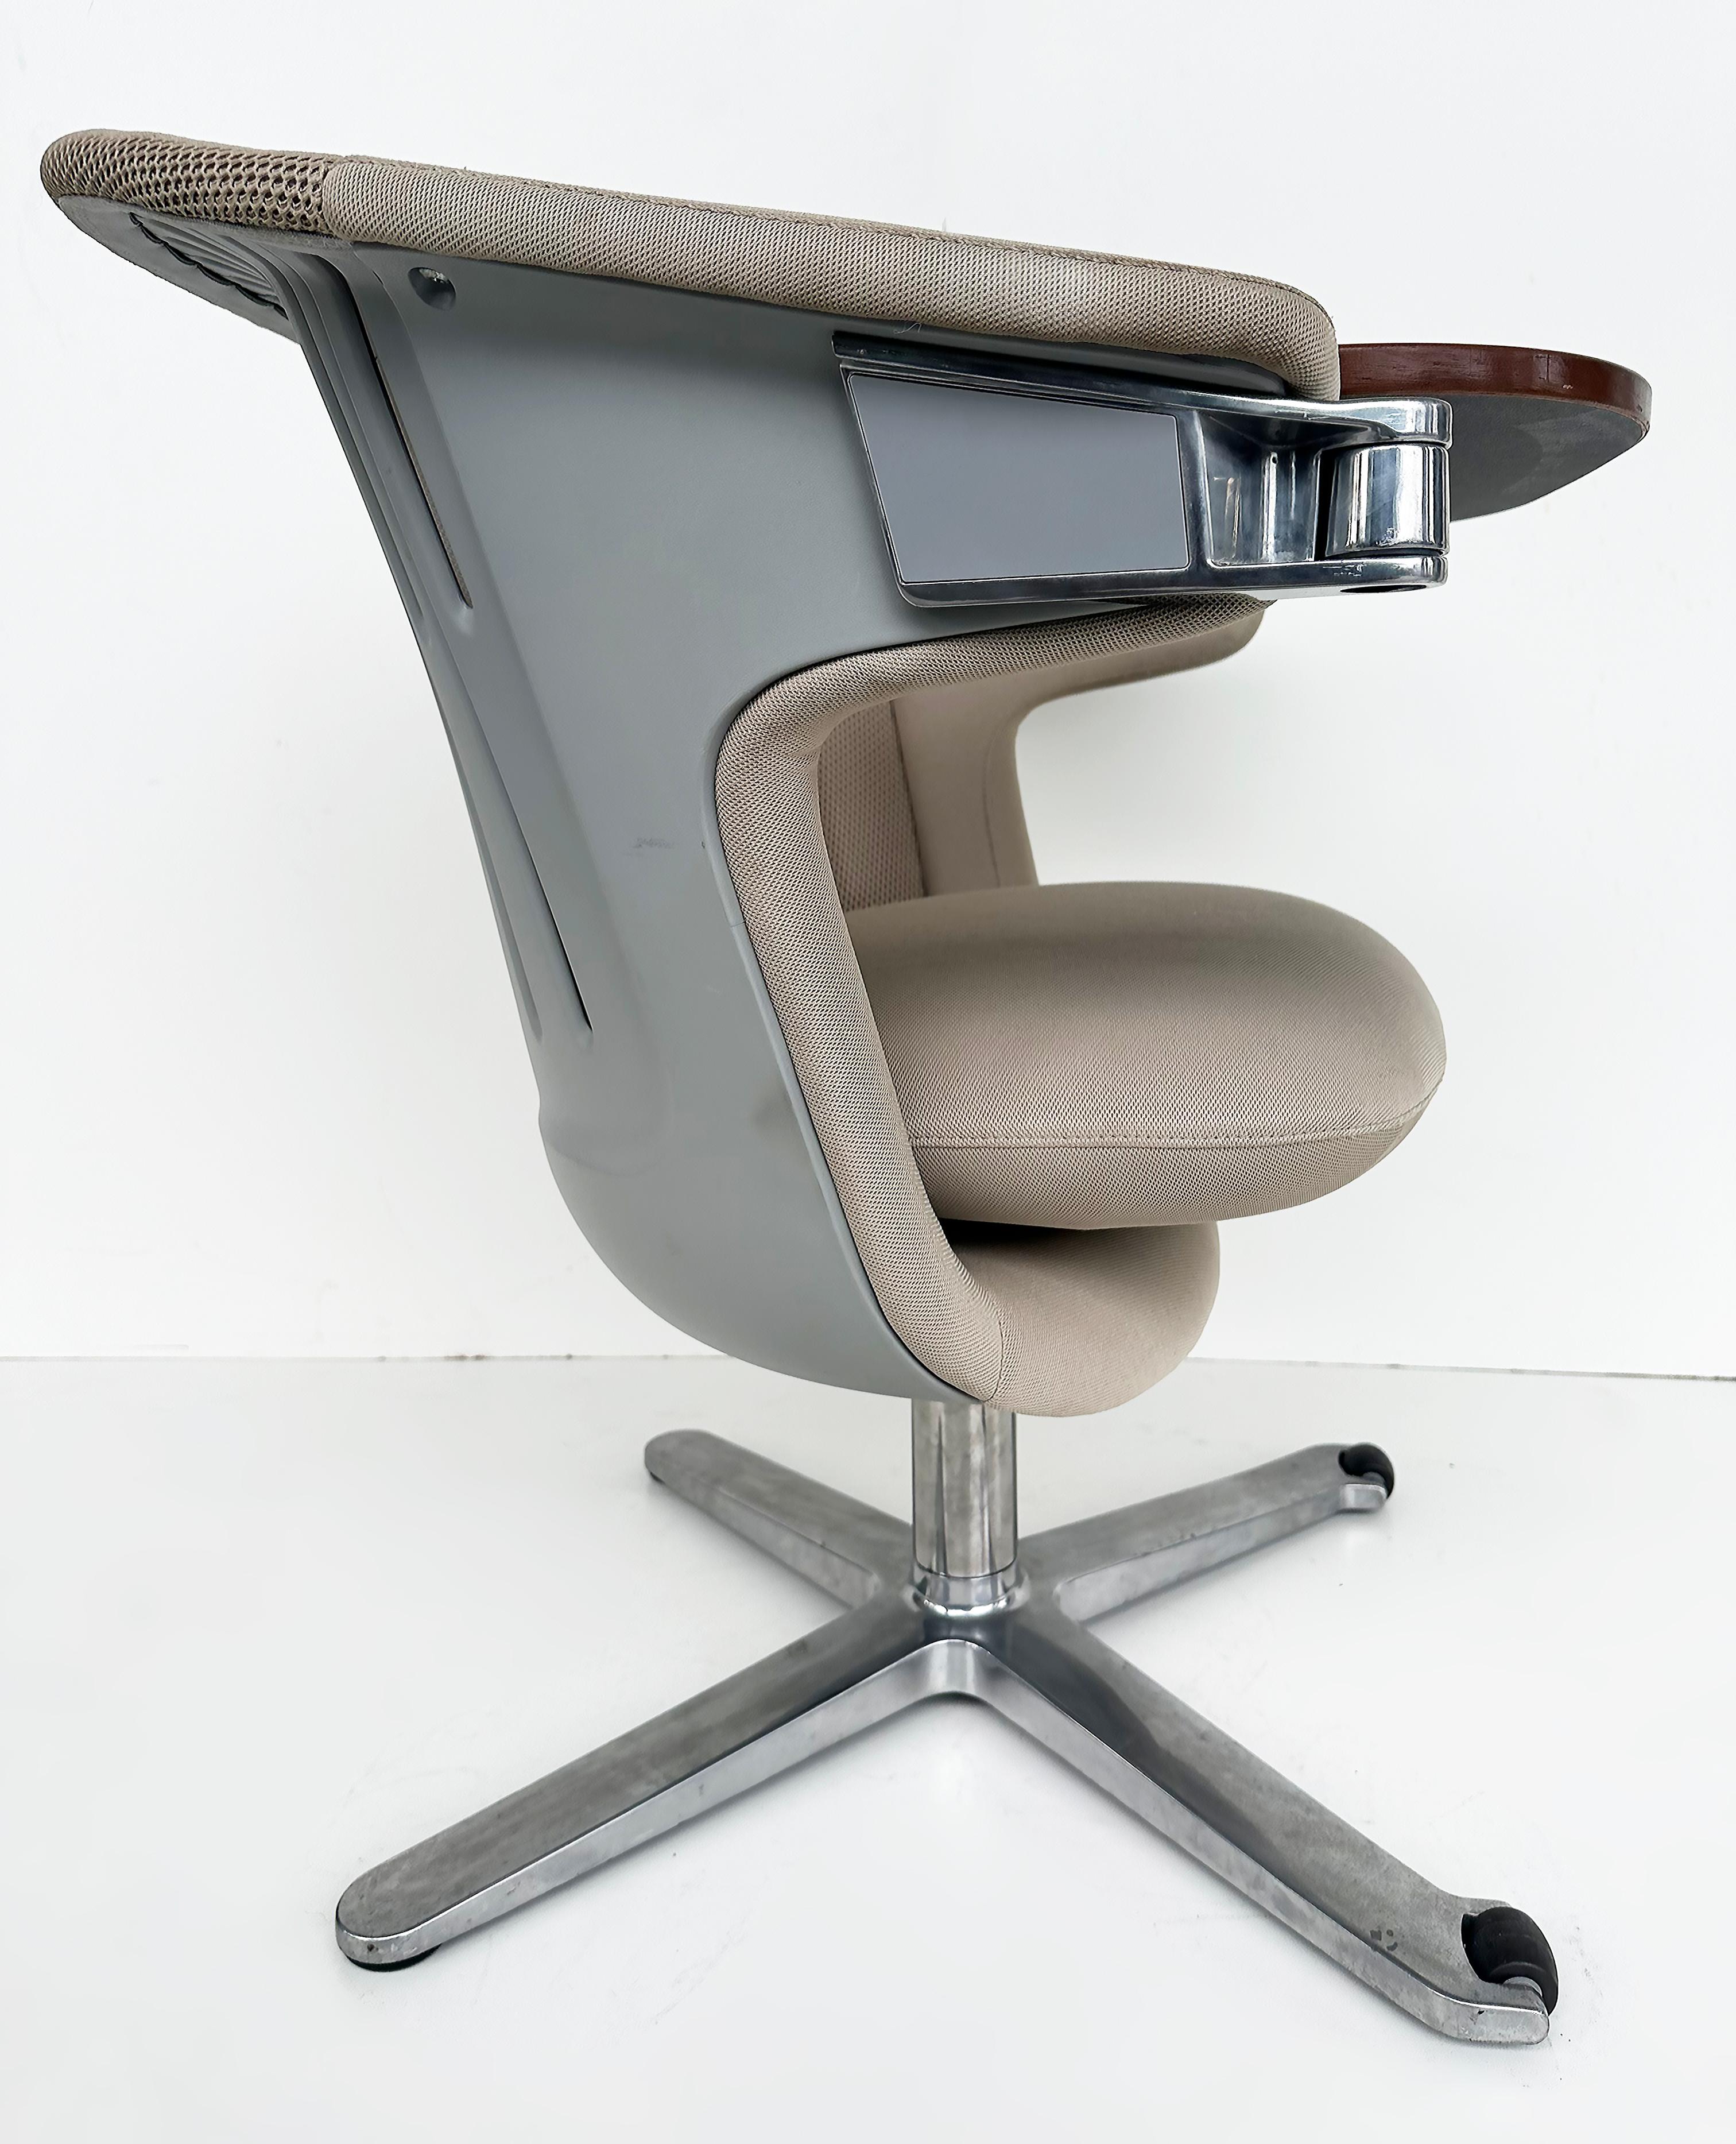 American Steelcase i2i Ergonomic Dual Swivel Graphite Lounge Chair with Writing Tablet For Sale